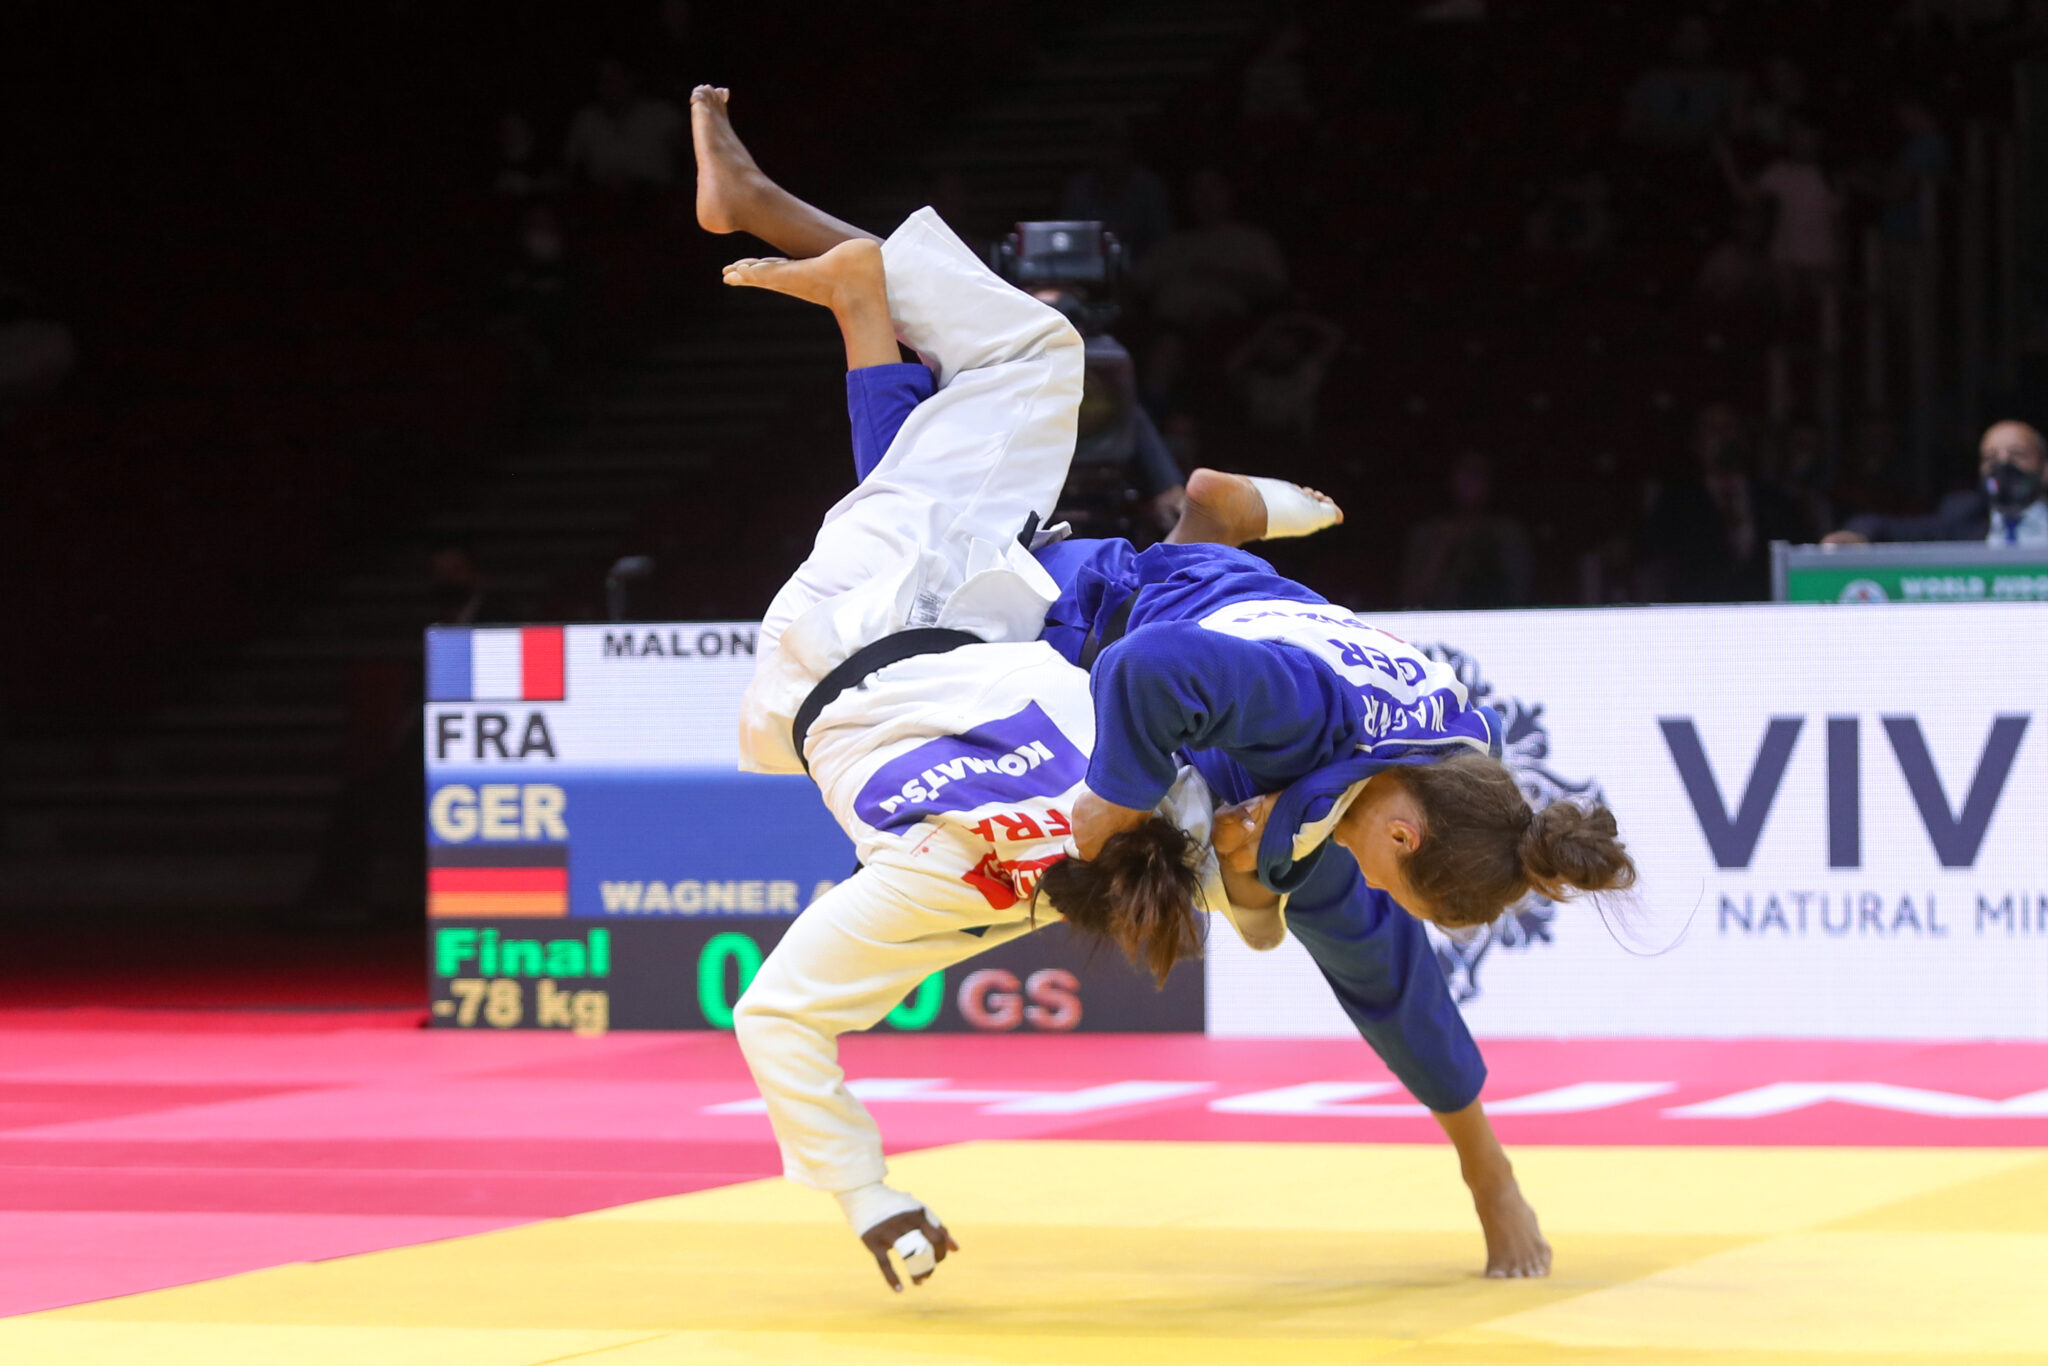 THE -78KG and -100KG ATHLETES PROVE TIMING IS EVERYTHING